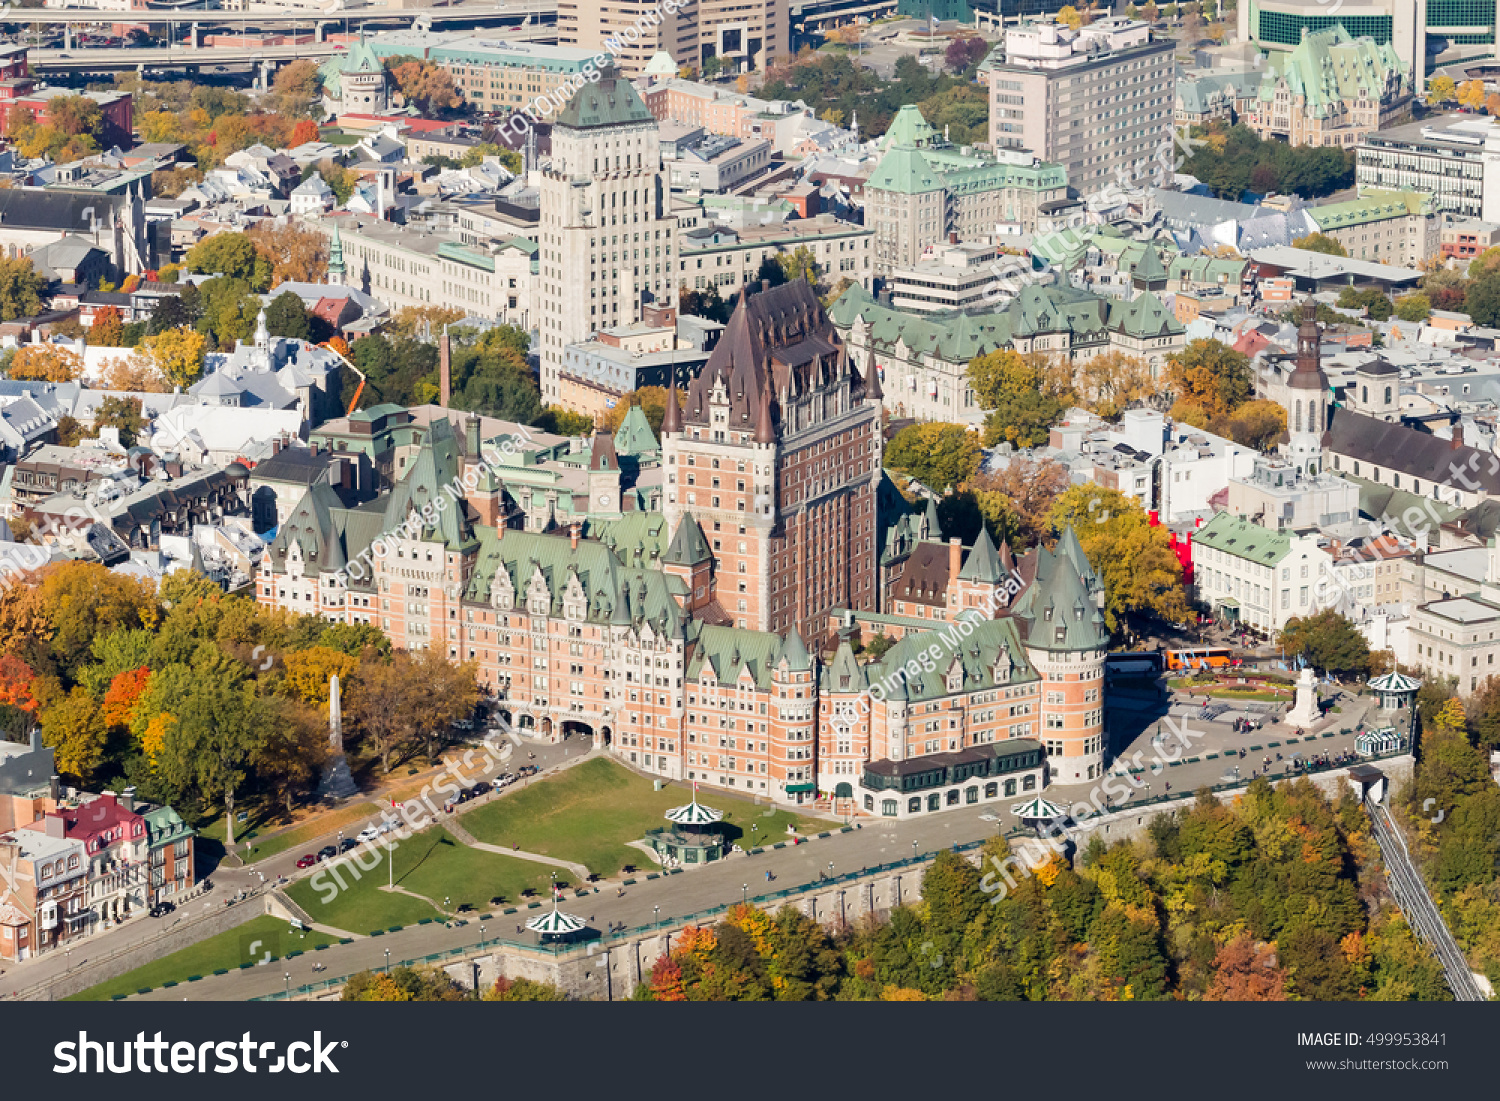 Aerial city view of the Old Quebec district and famed chateau Frontenac, a popular tourist destination in Canada. #499953841